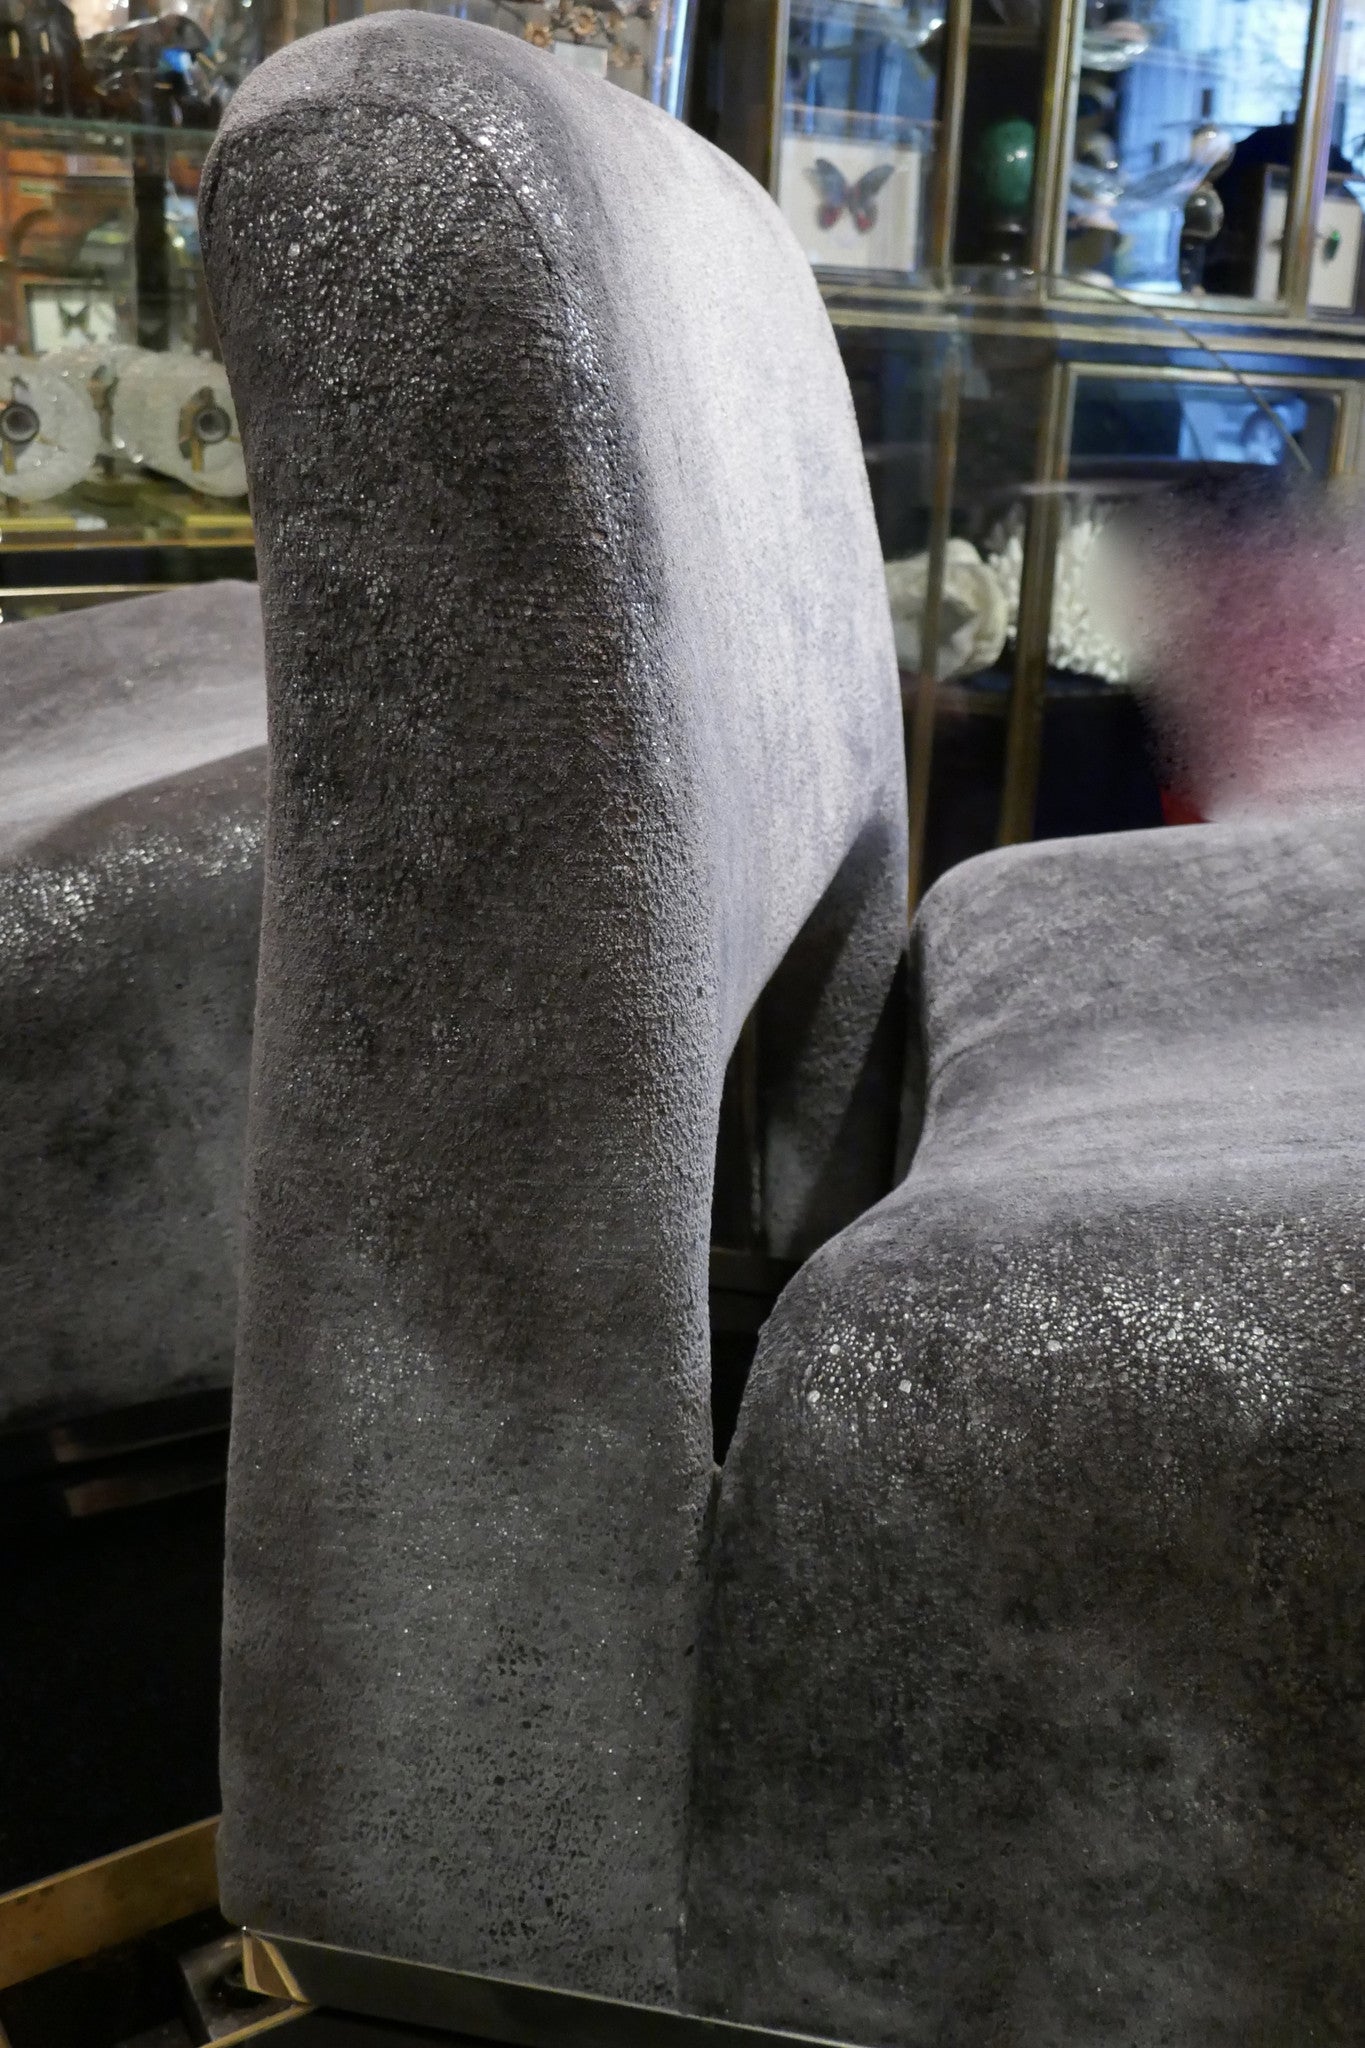 X Pair of French 1970s futuristic chairs re-upholstered in Romo metallic fabric.